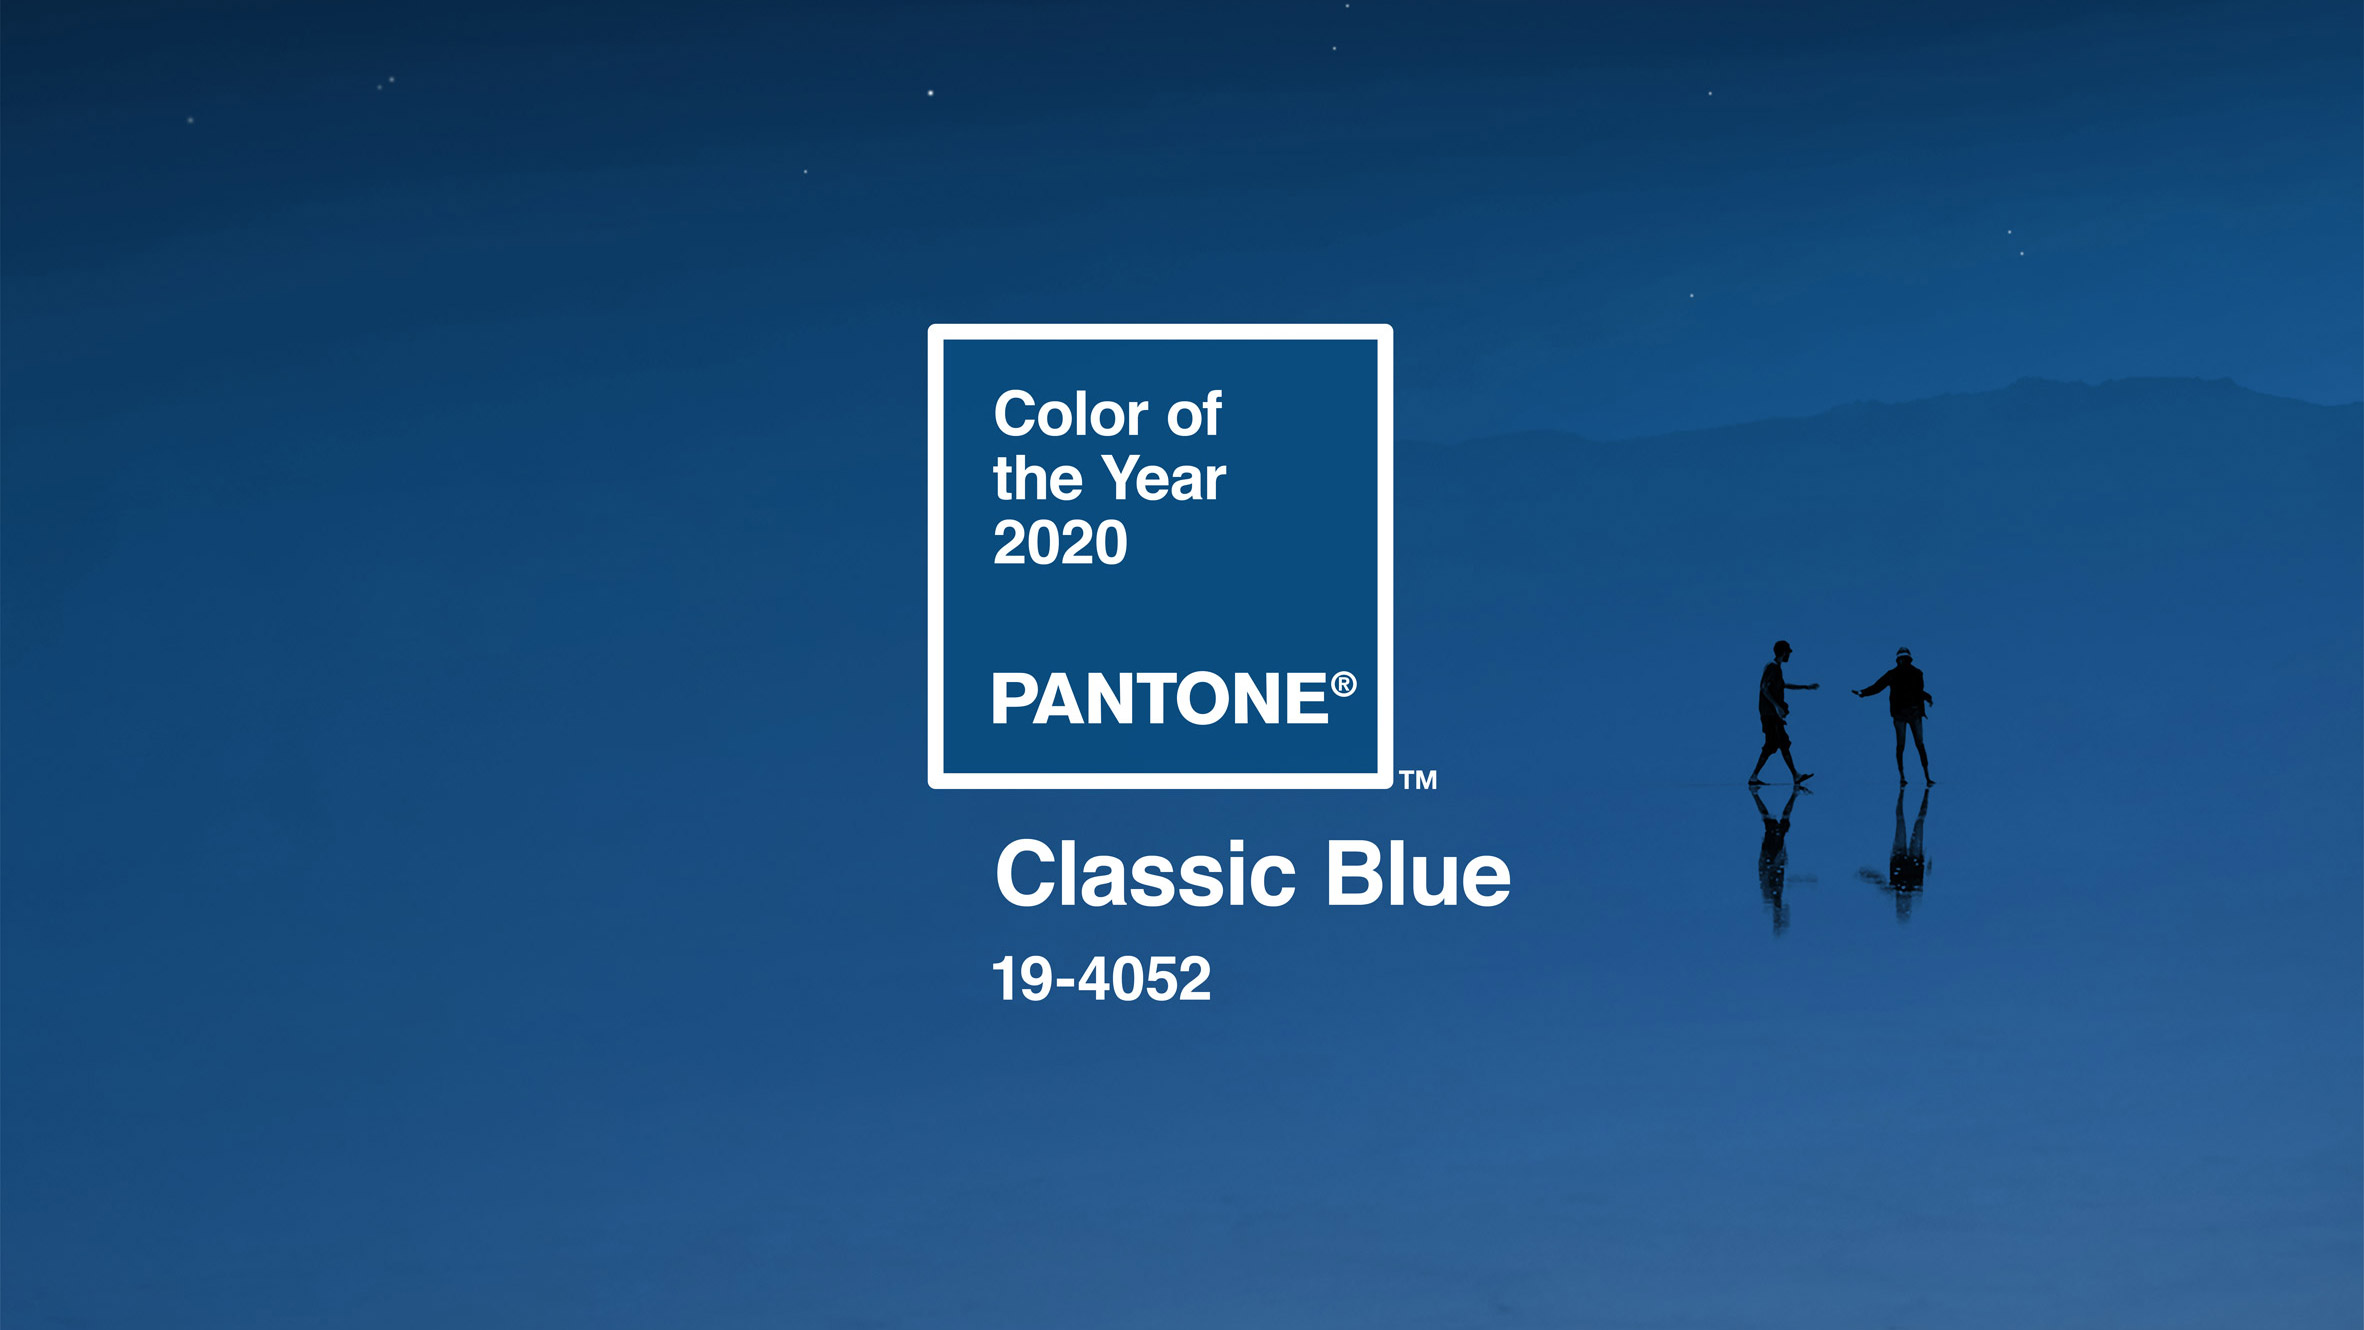 Pantone Colour of the Year 2020 Classic Blue